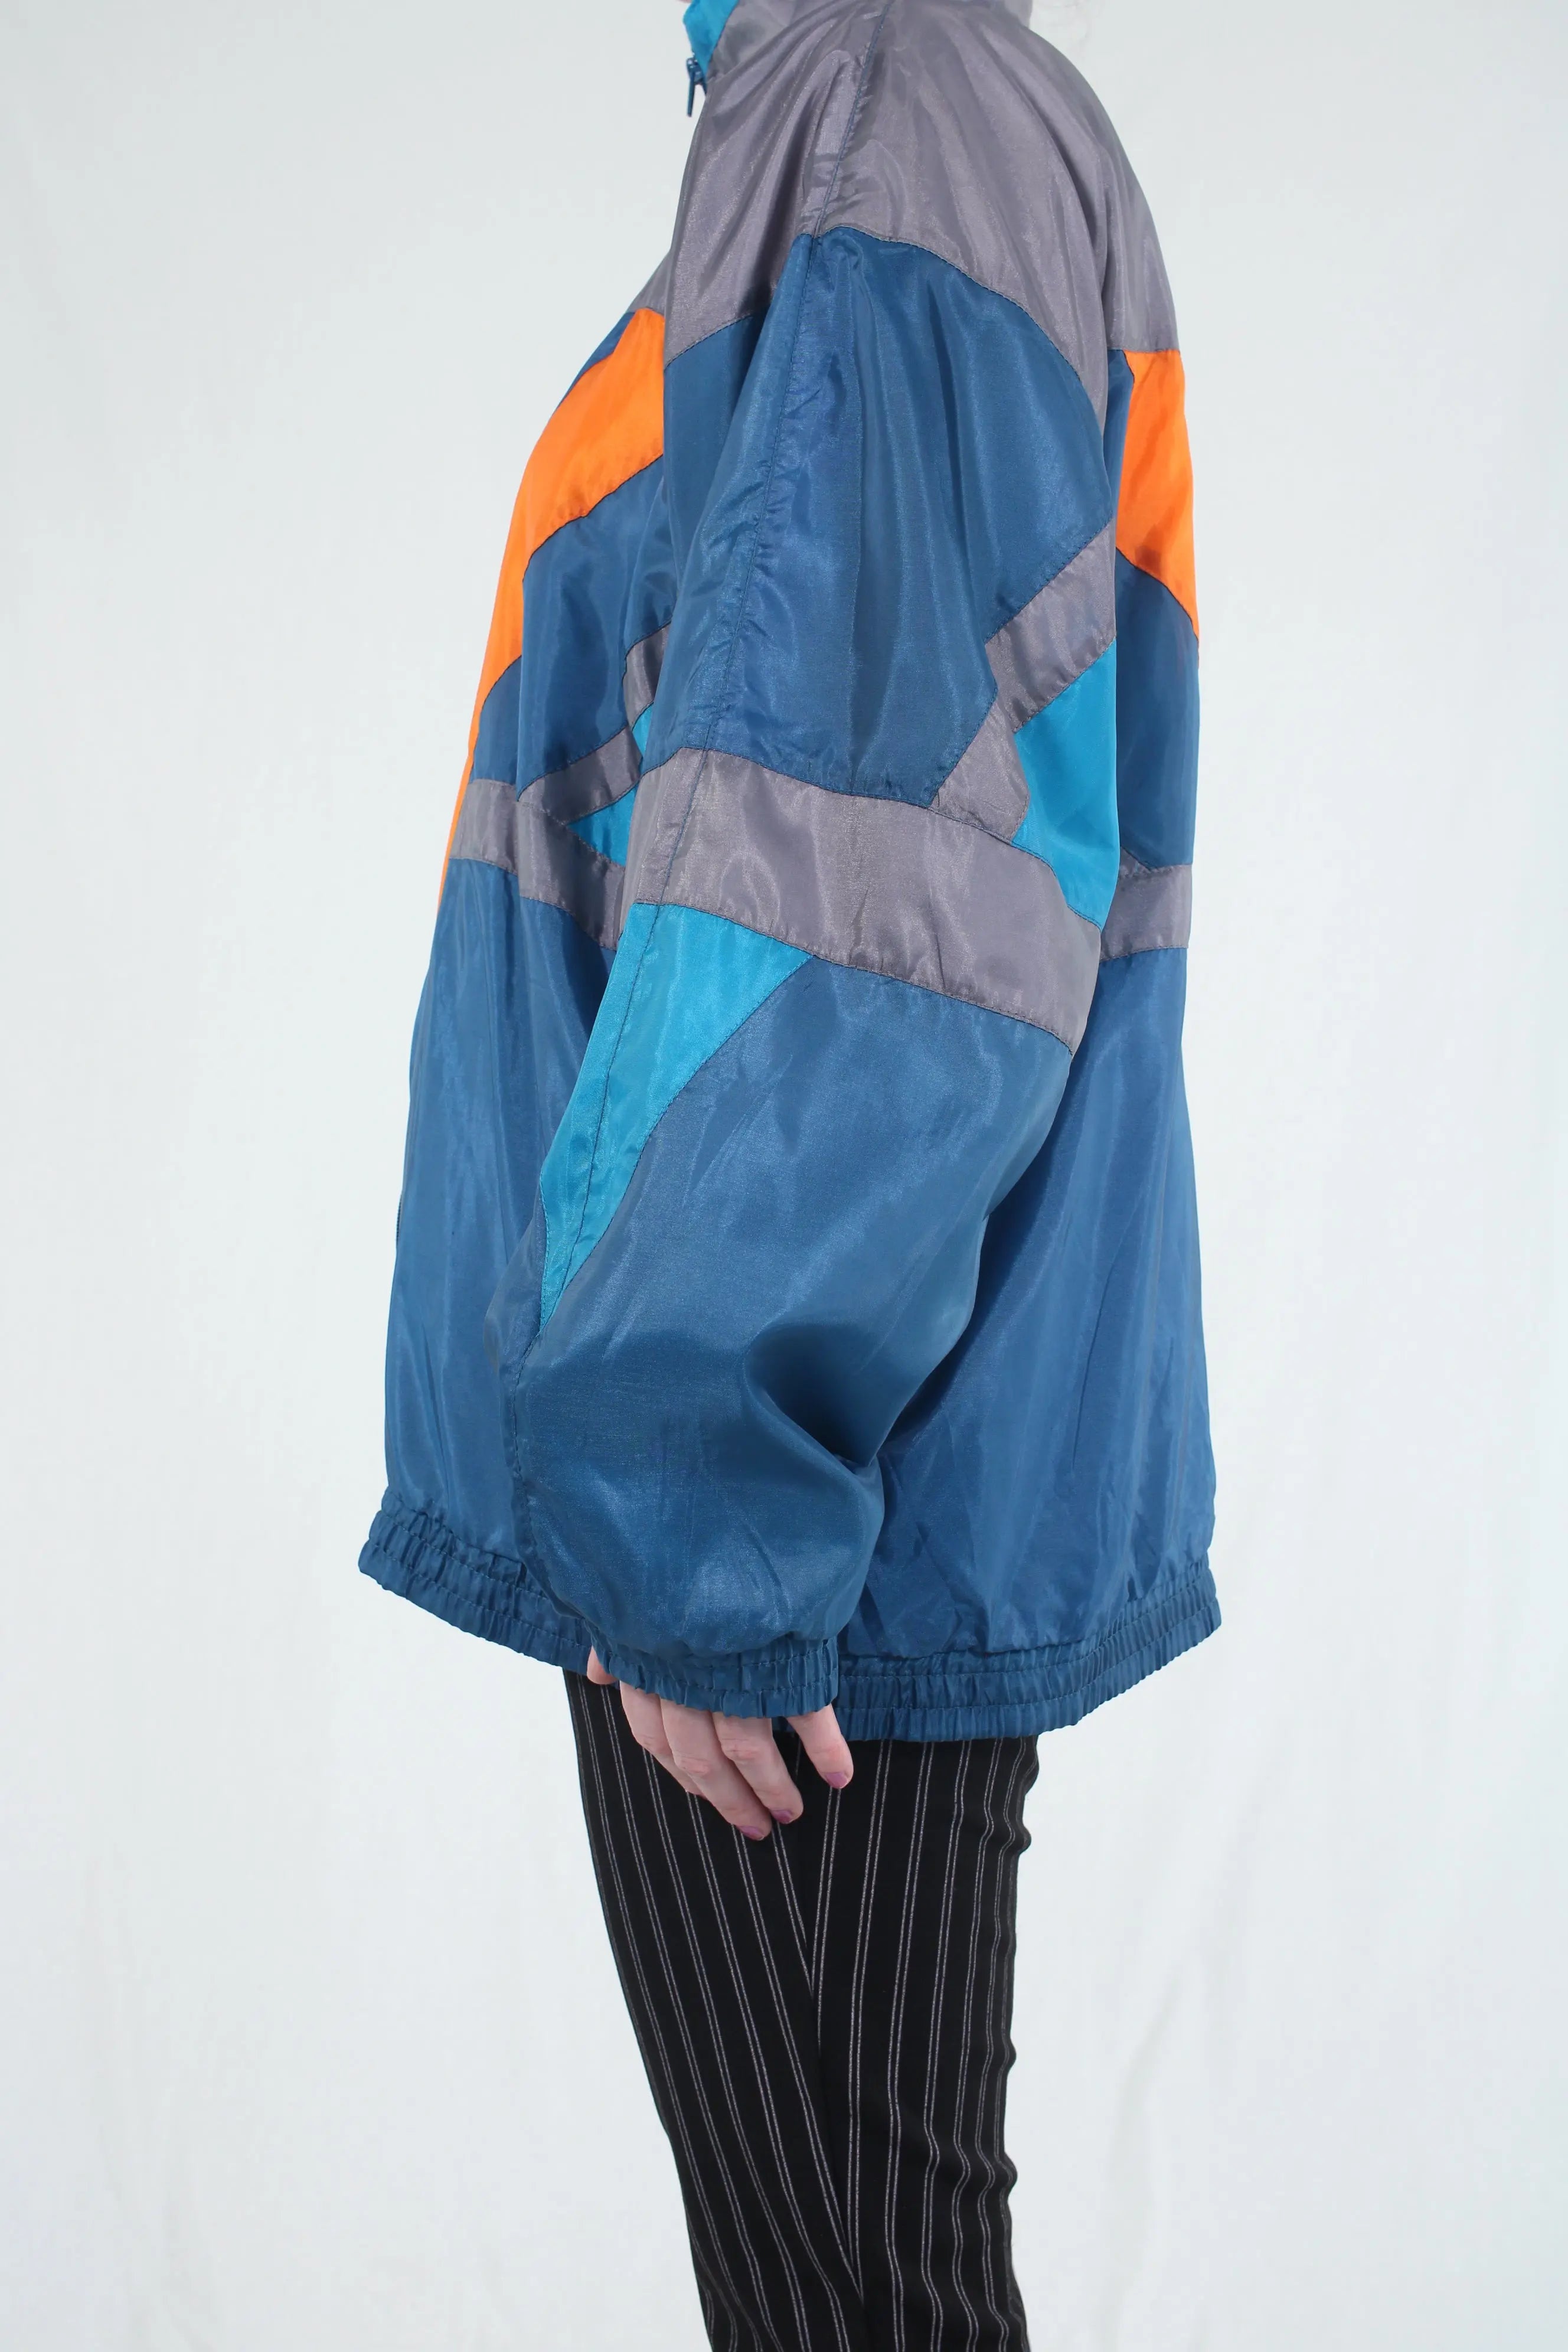 Thomas Philipps - 90s Windbreaker- ThriftTale.com - Vintage and second handclothing